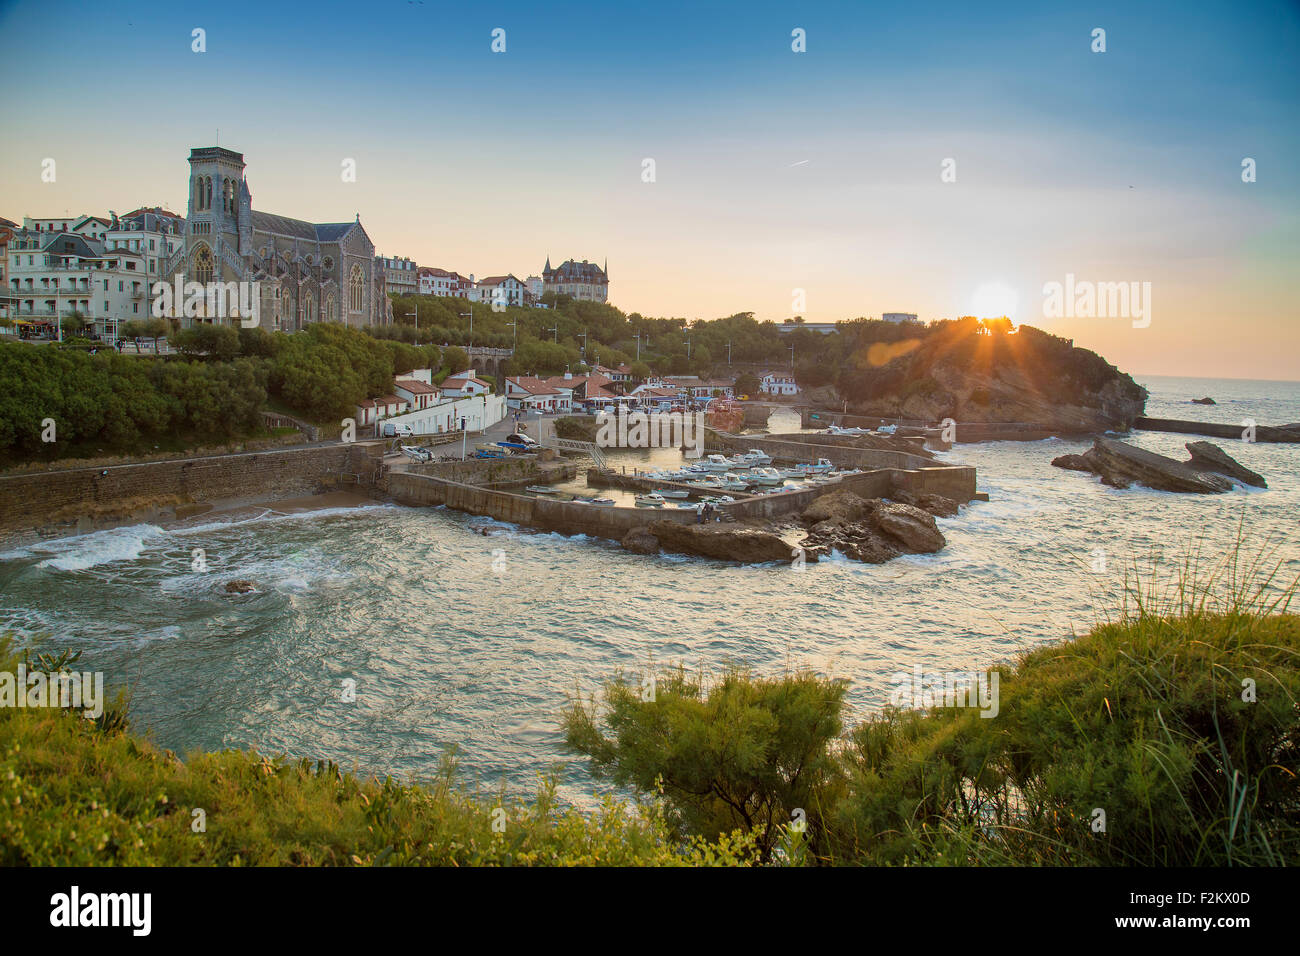 Old Port at Biarritz, France at sunset Stock Photo